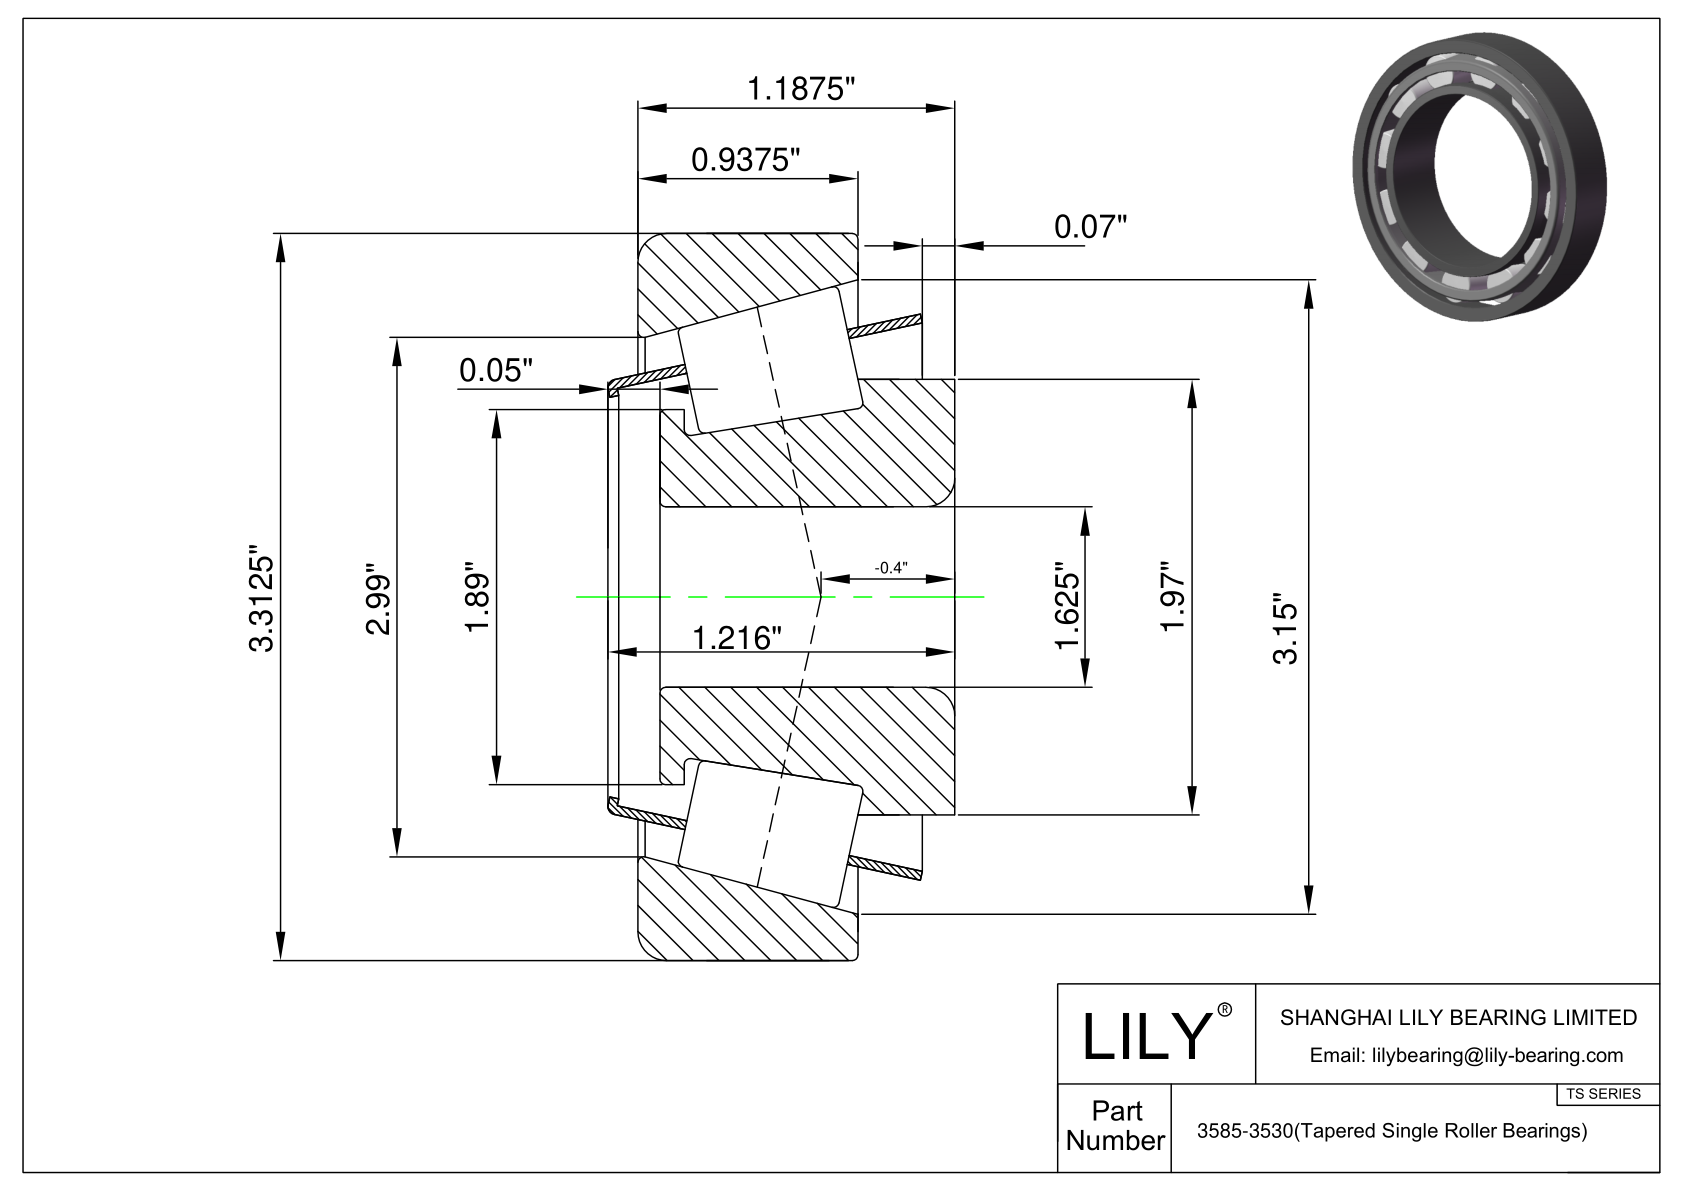 3585-3530 TS (Tapered Single Roller Bearings) (Imperial) cad drawing